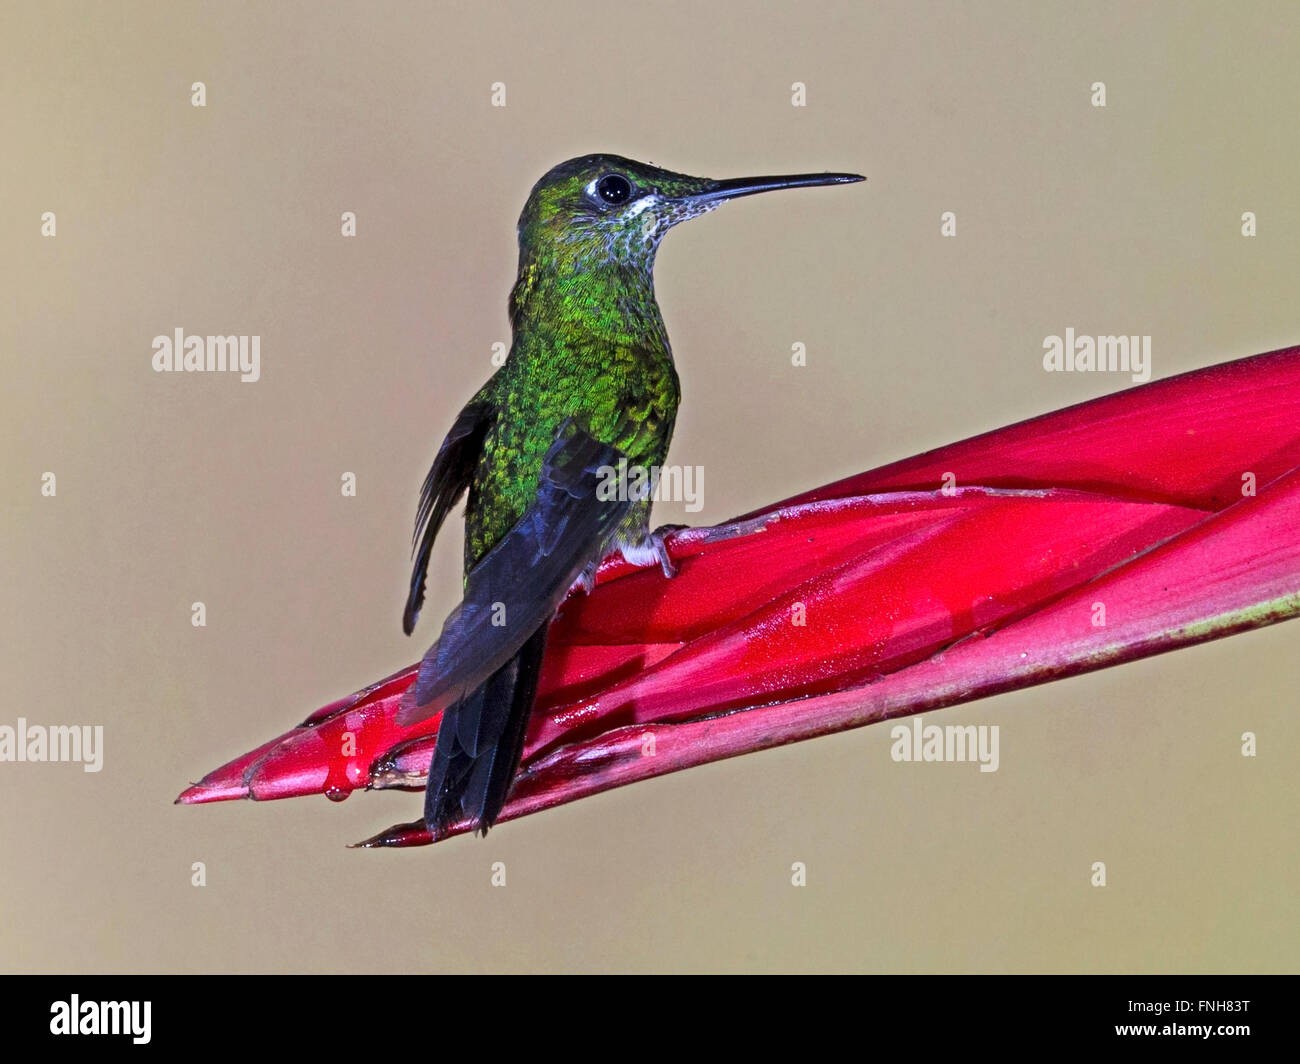 Female green-crowned brilliant hummingbird perched on flower Stock Photo